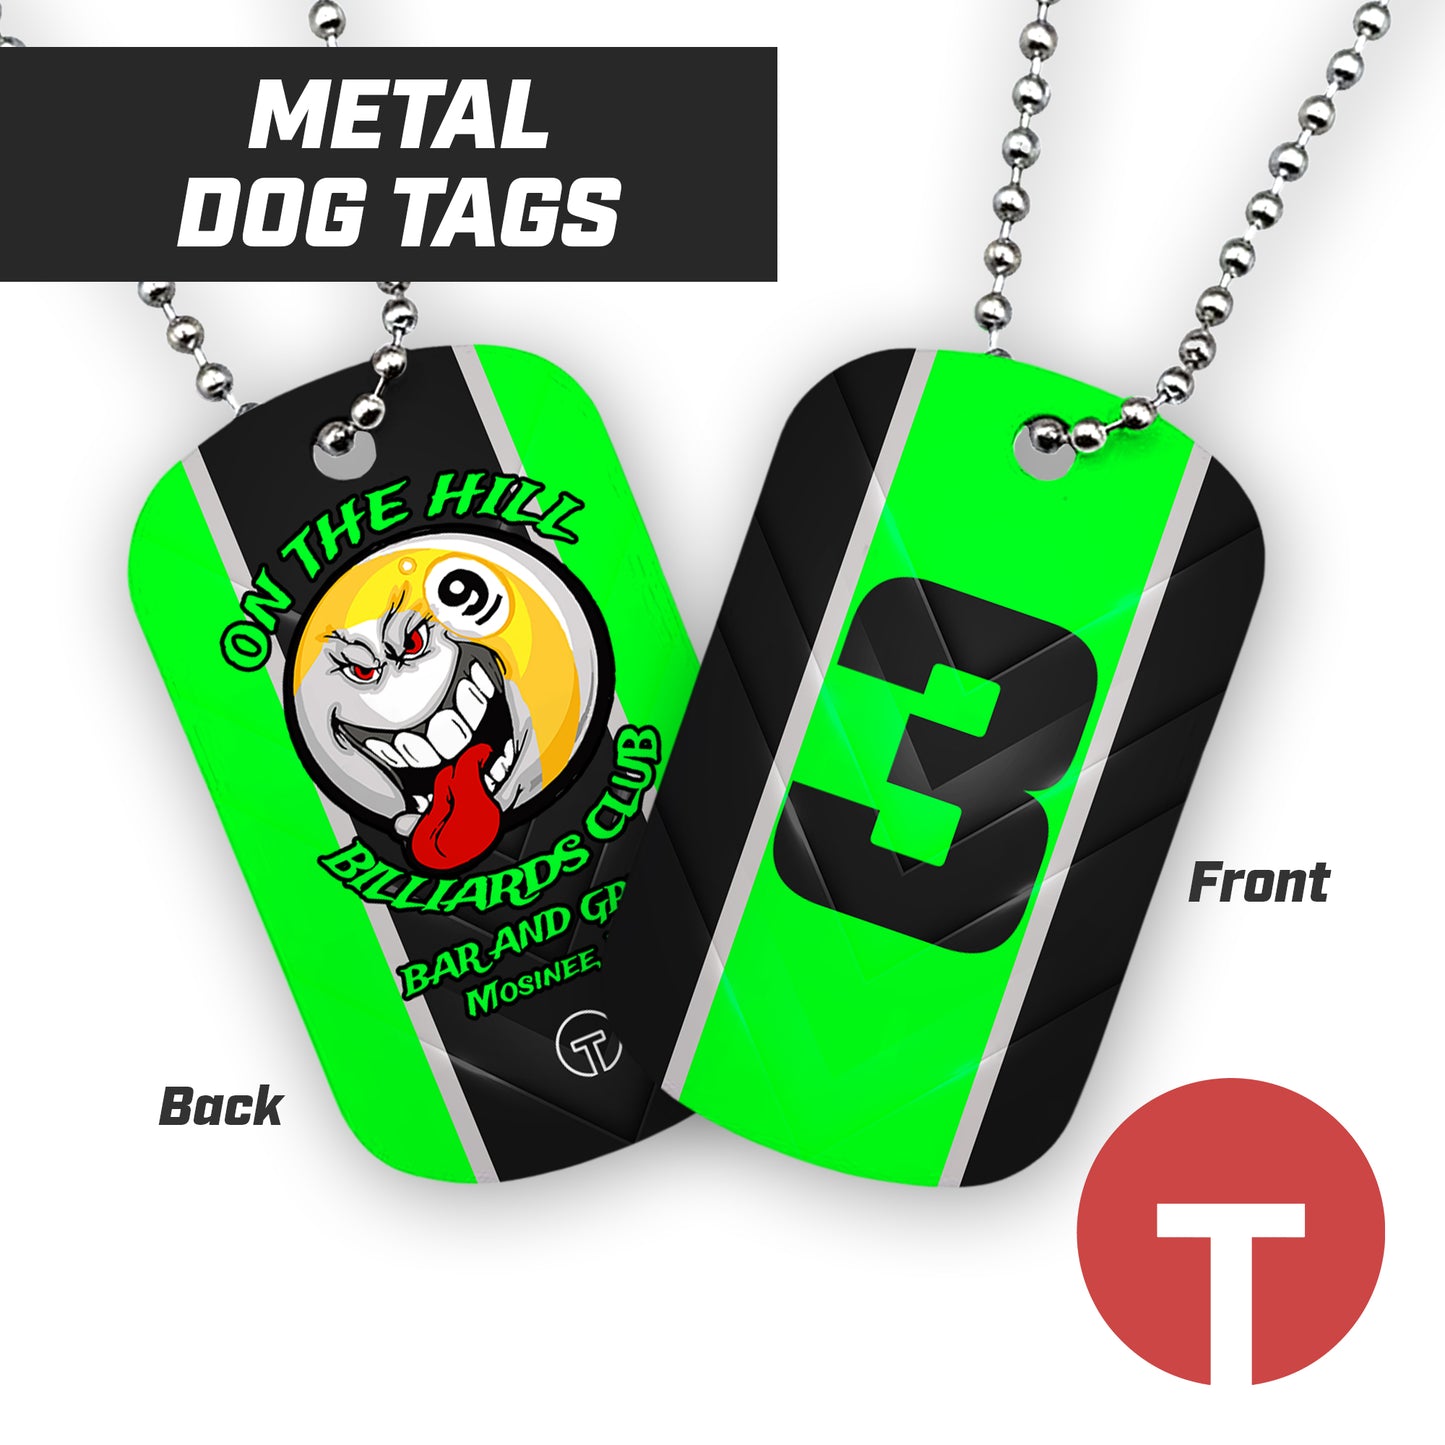 On the Hill Billiards Club - Double Sided Dog Tags